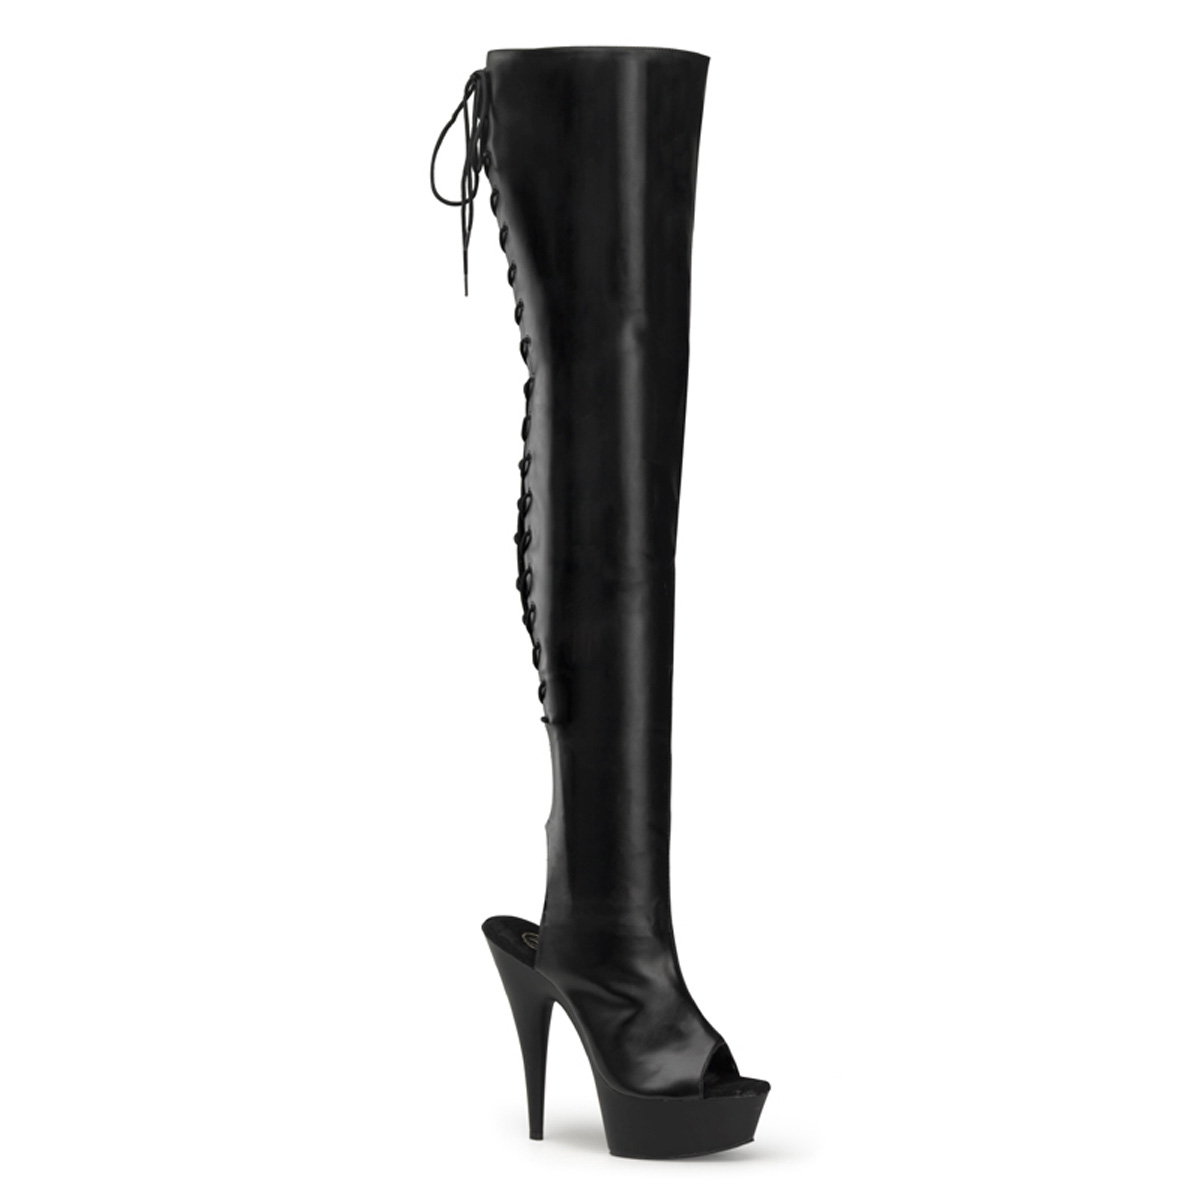 Pleaser SHOES & BOOTS : Platform Shoes : Thigh High Boots